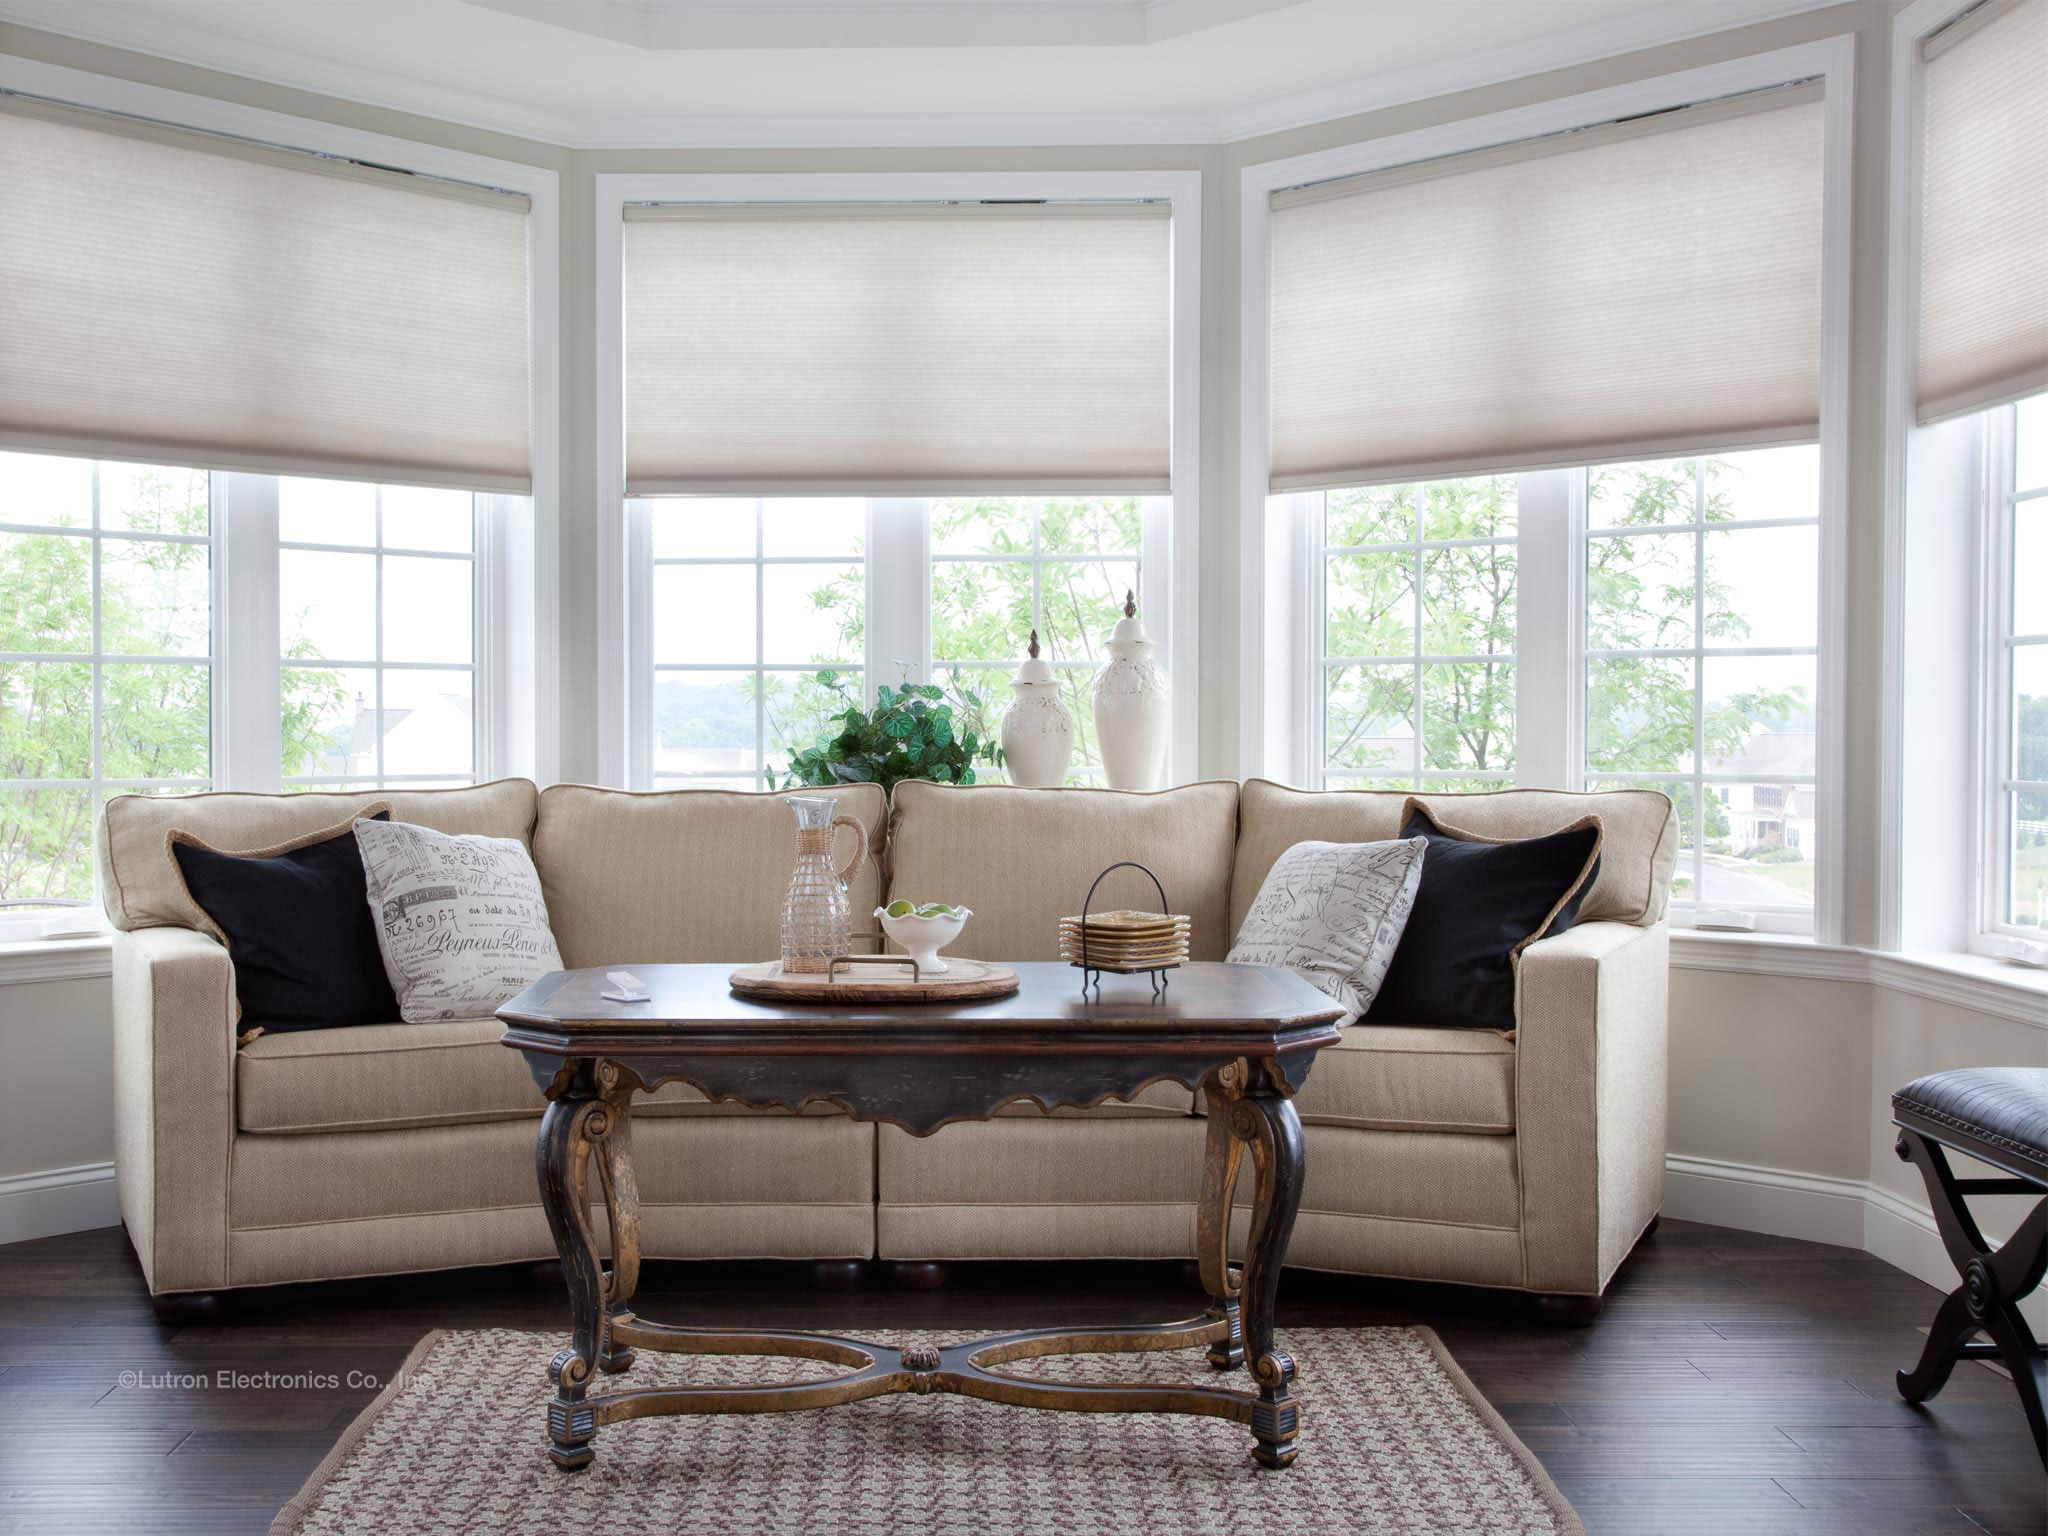 Lutron Blinds - Electric Blinds - Automatic blinds and shades